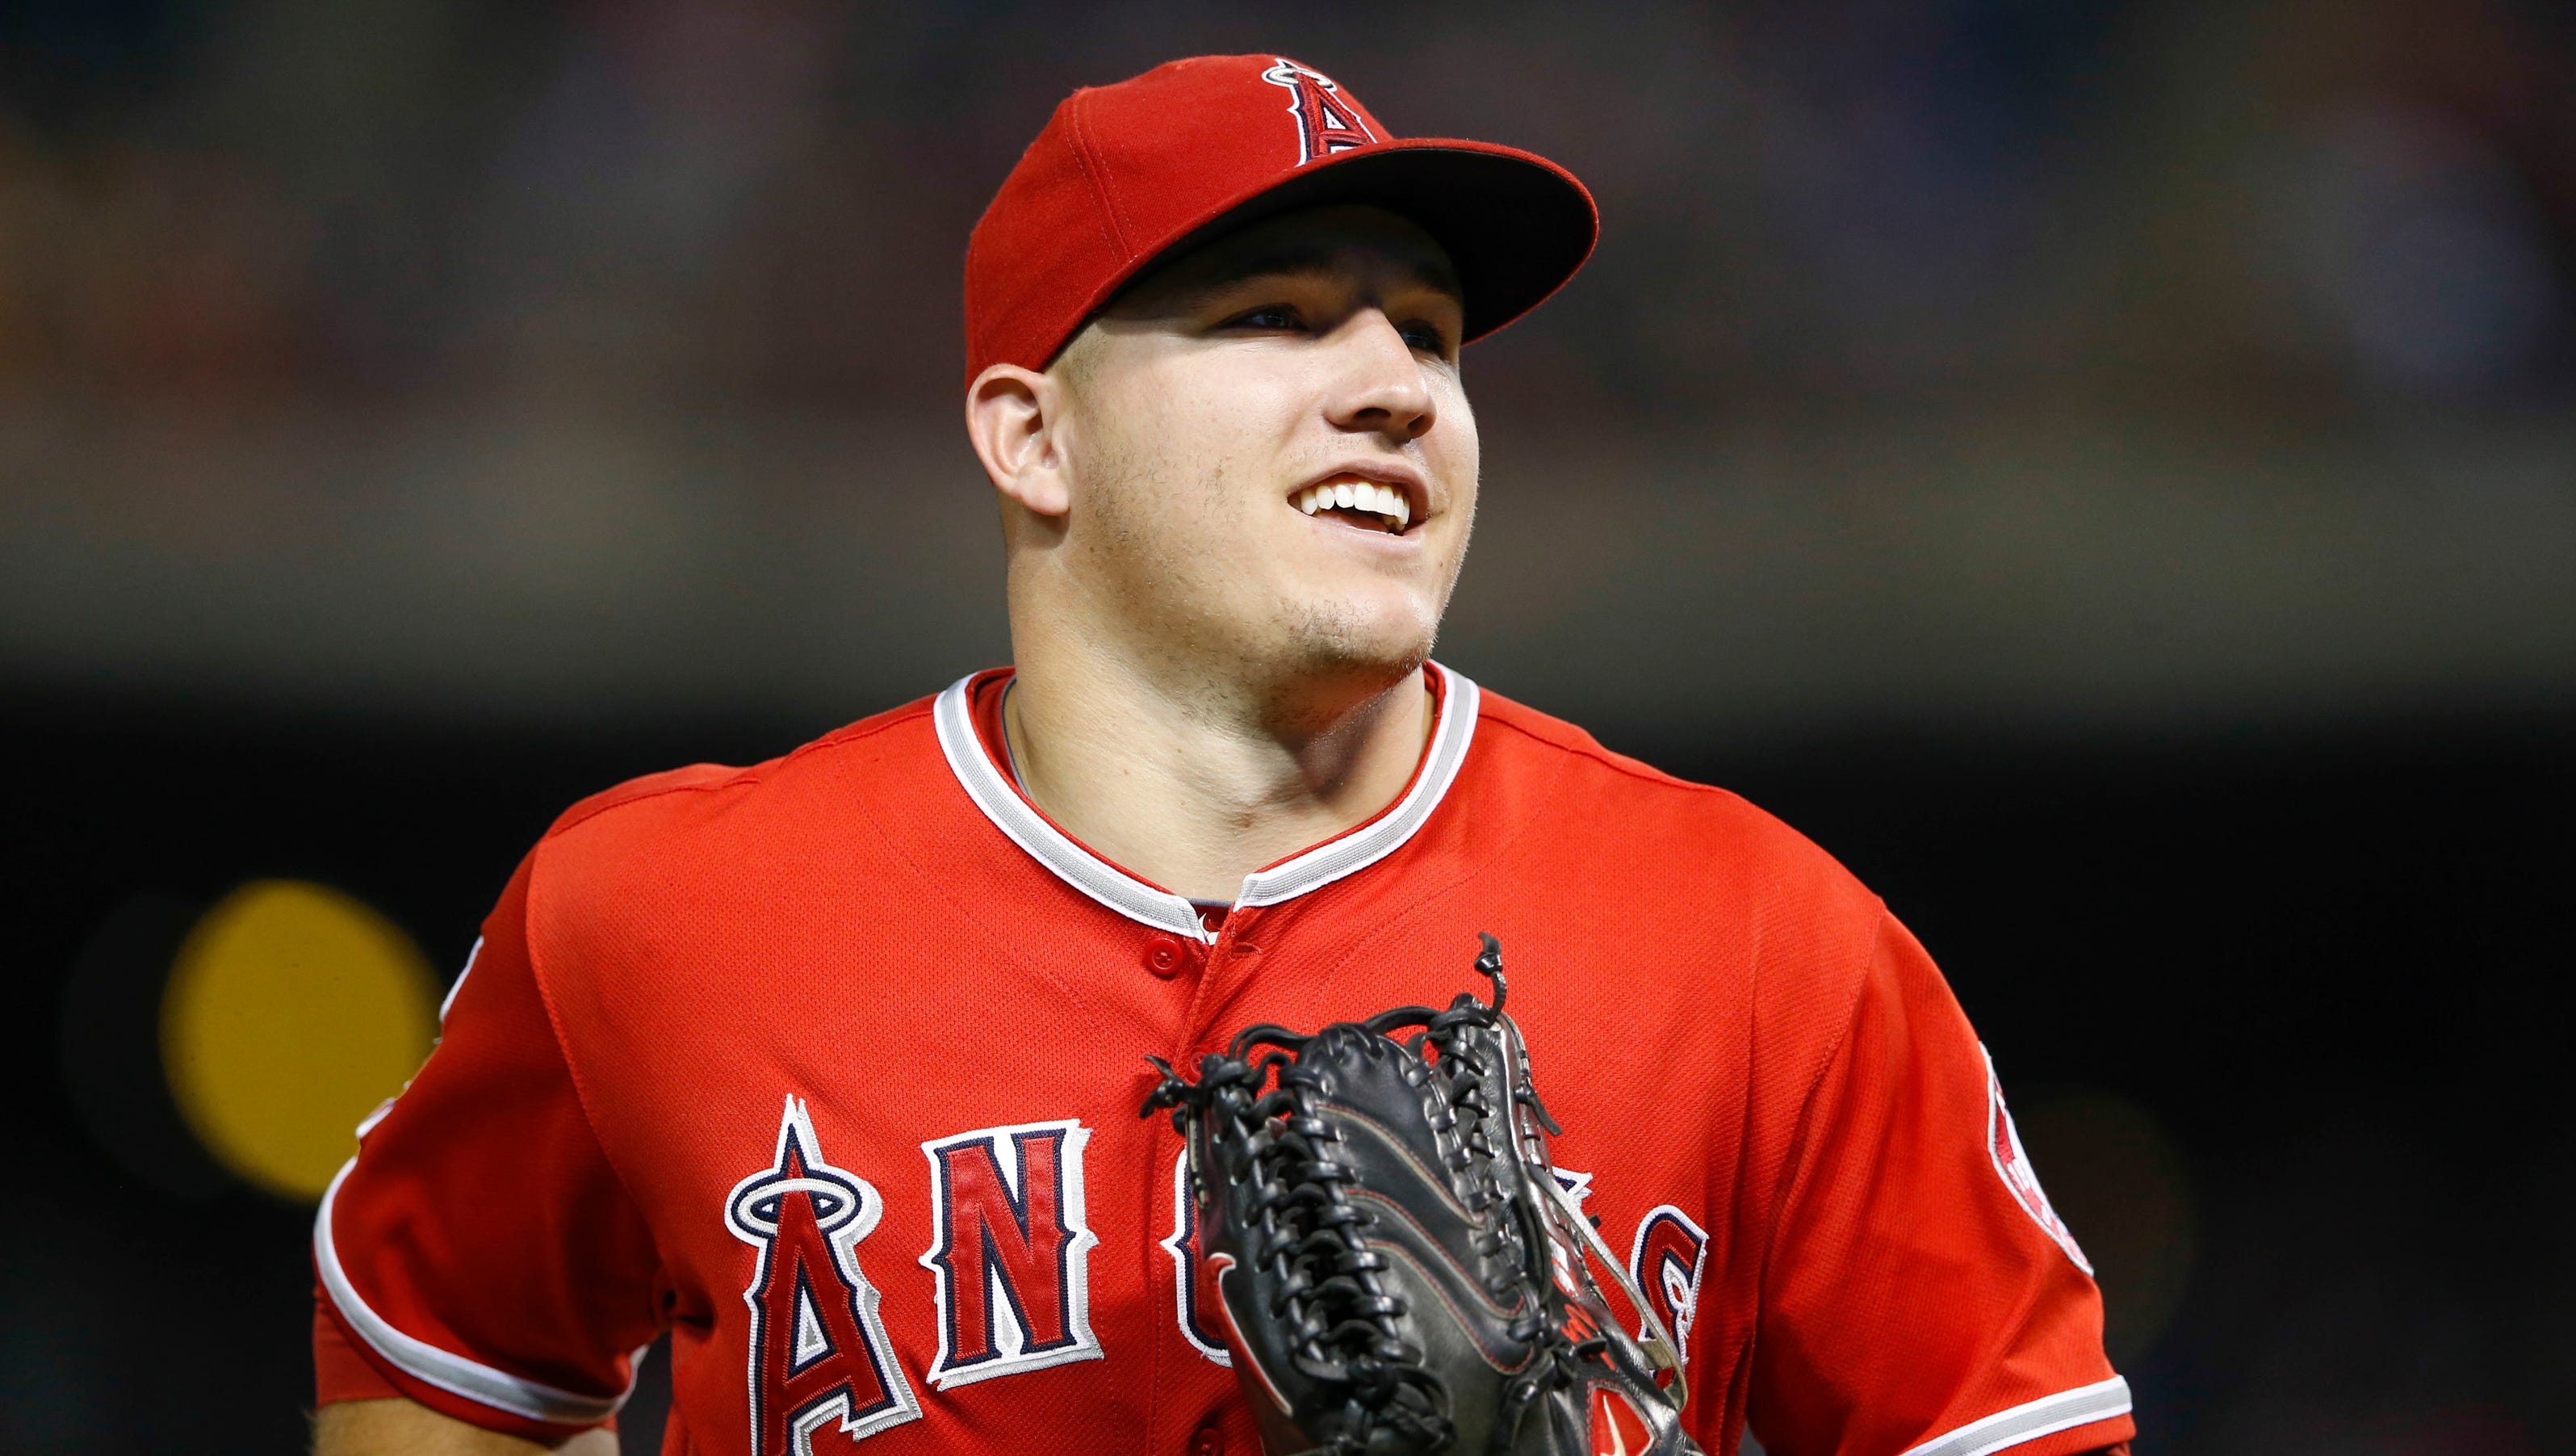 Angels' Mike Trout unanimous choice for AL MVP